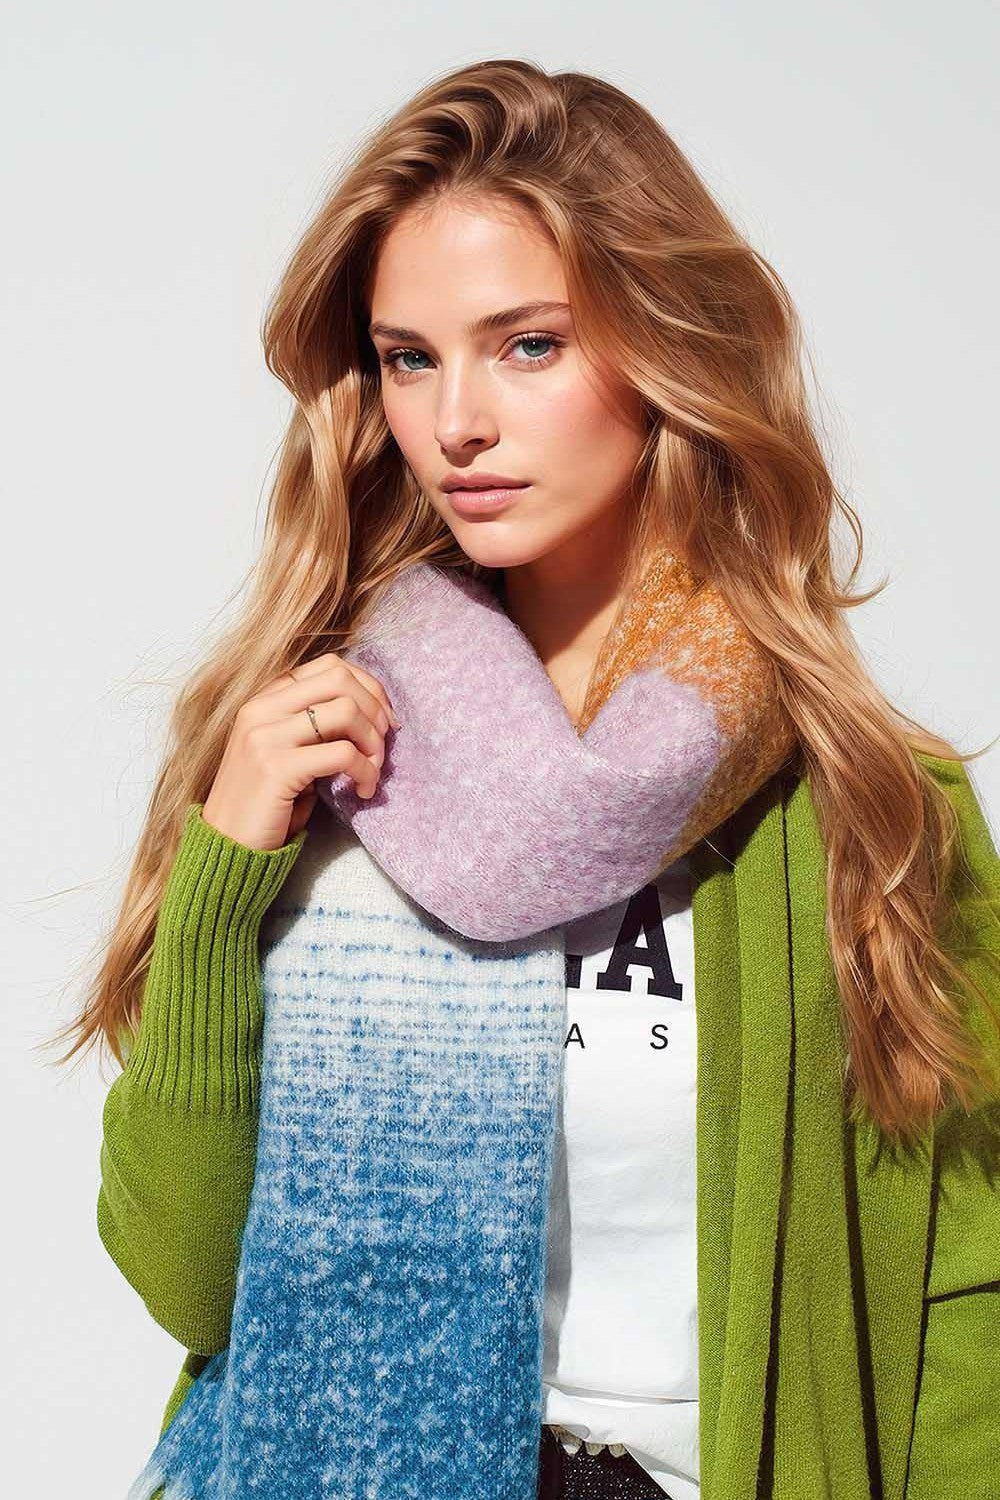 Multi Colored Chunky Knit Scarf in Multicolor Stripes Green and Blue - Mack & Harvie